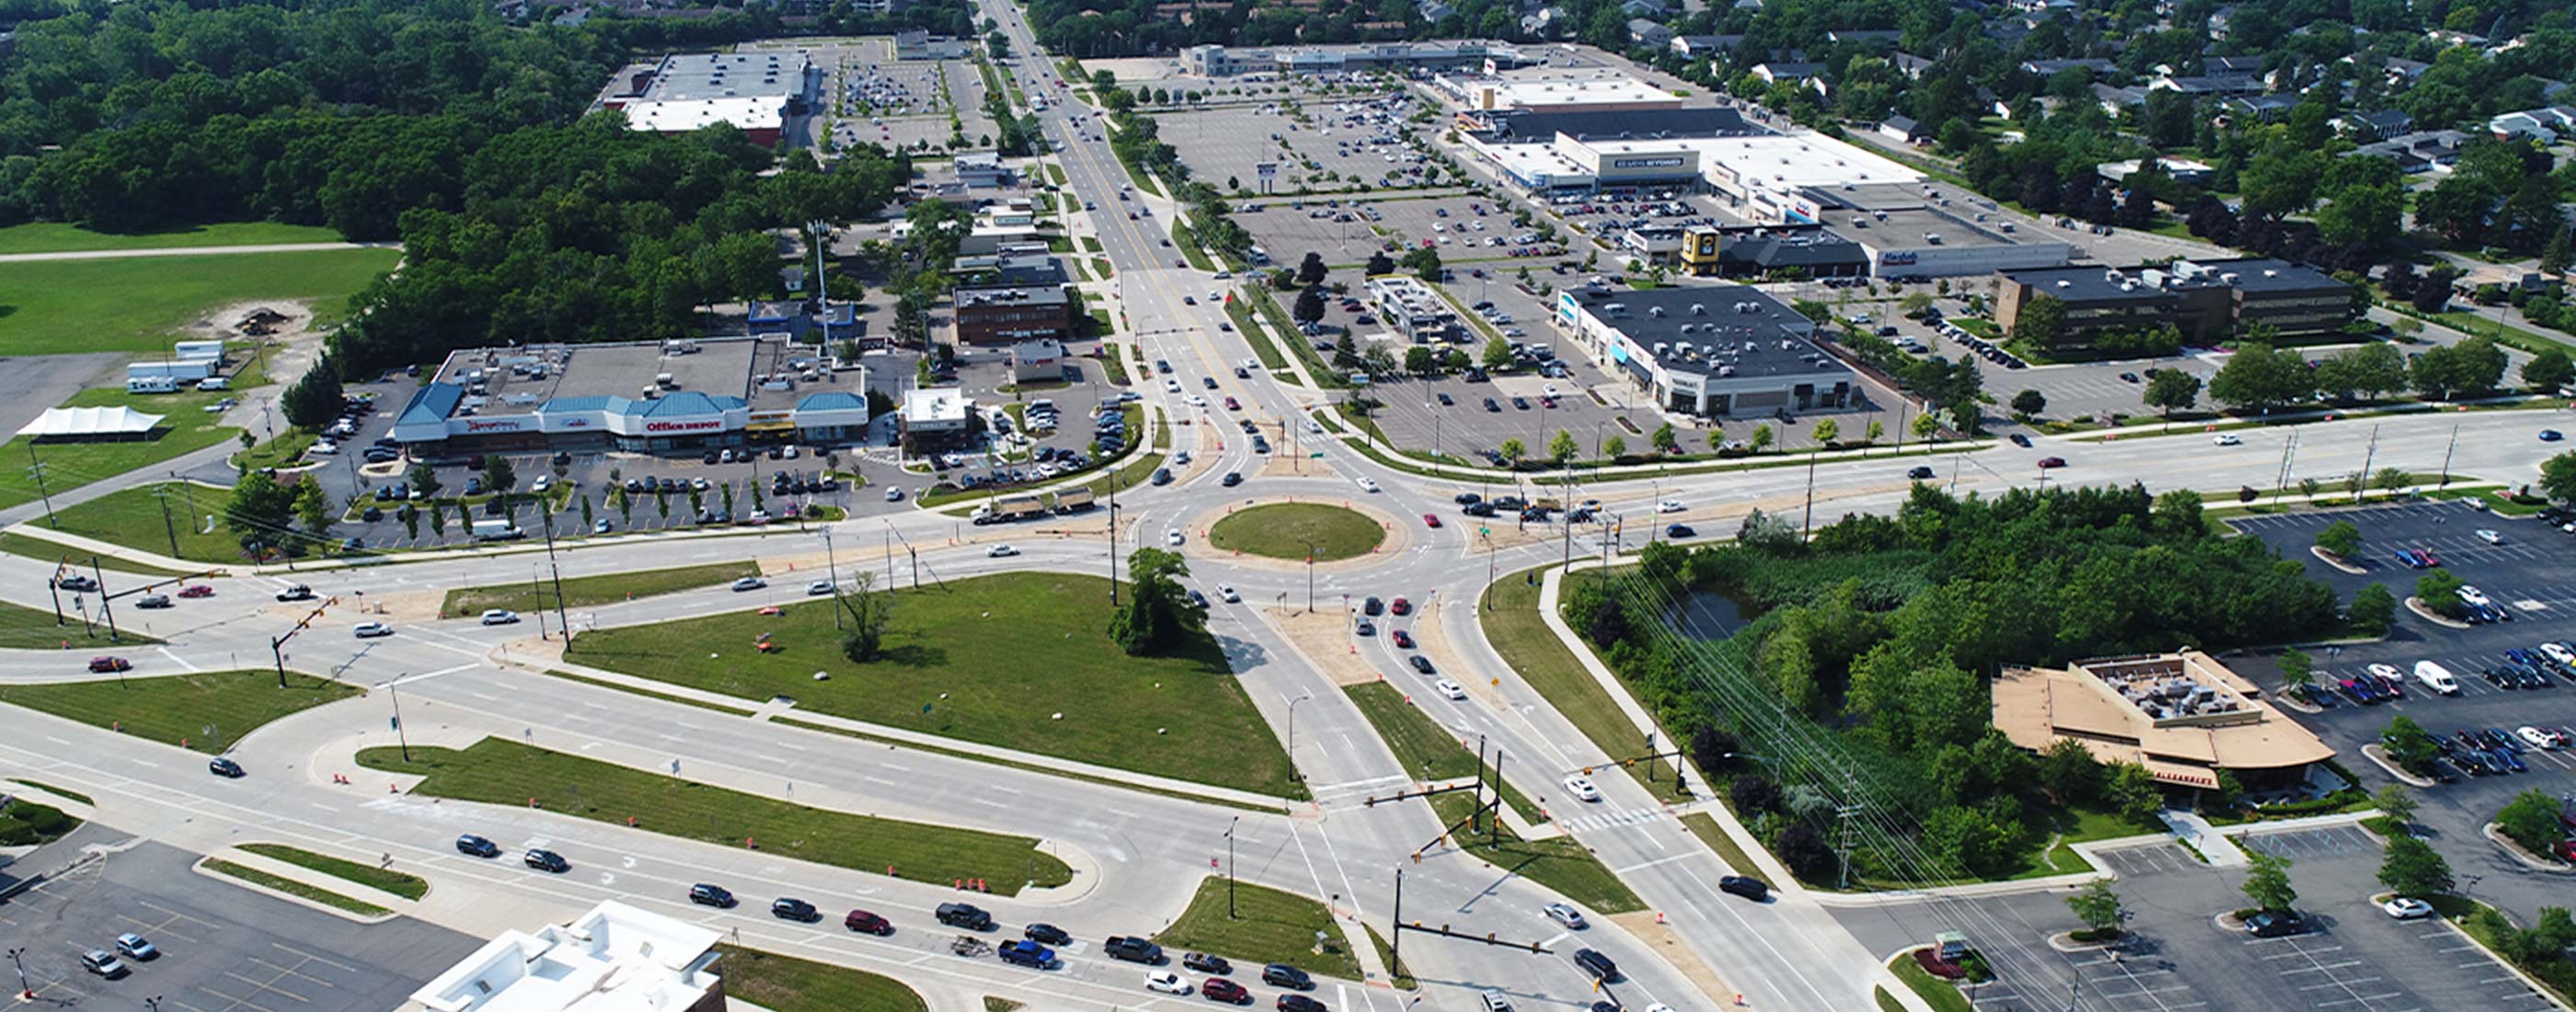 The Orchard Lake Boulevard included reconstruction from a 5-lane road to a 4-lane boulevard.